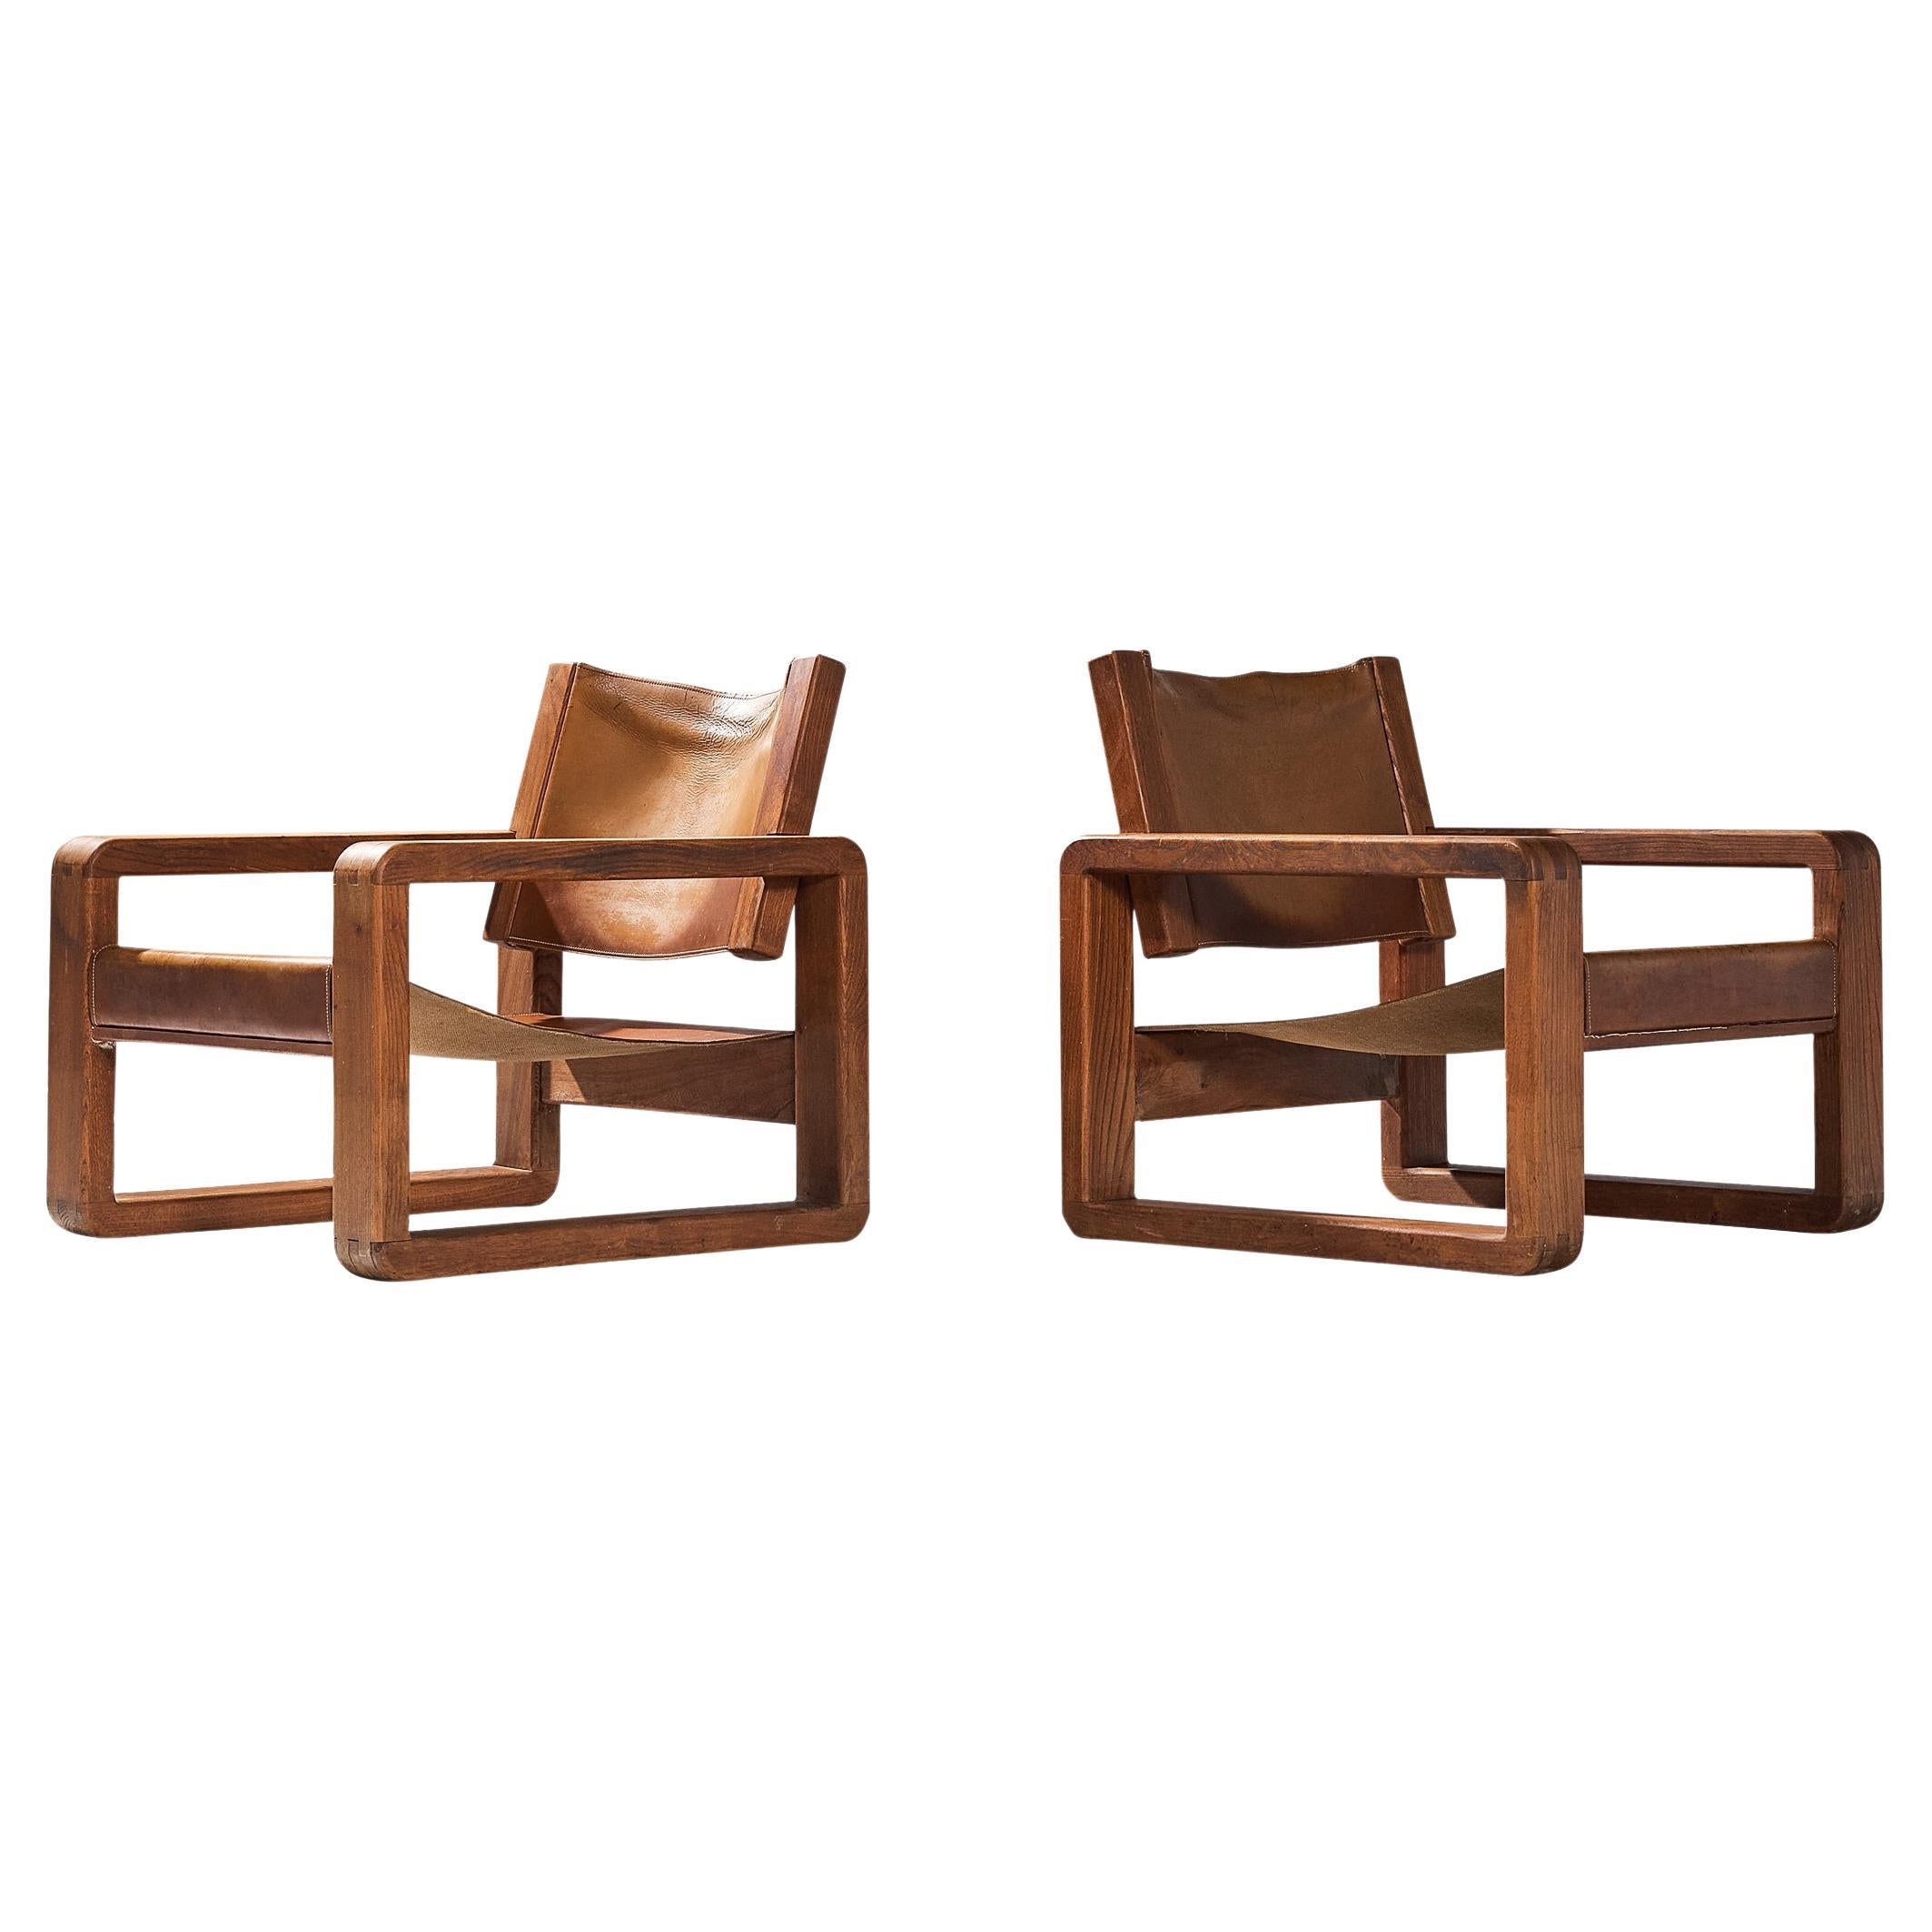 Galerie l'Orme Pair of Armchairs in Elm and Cognac Leather